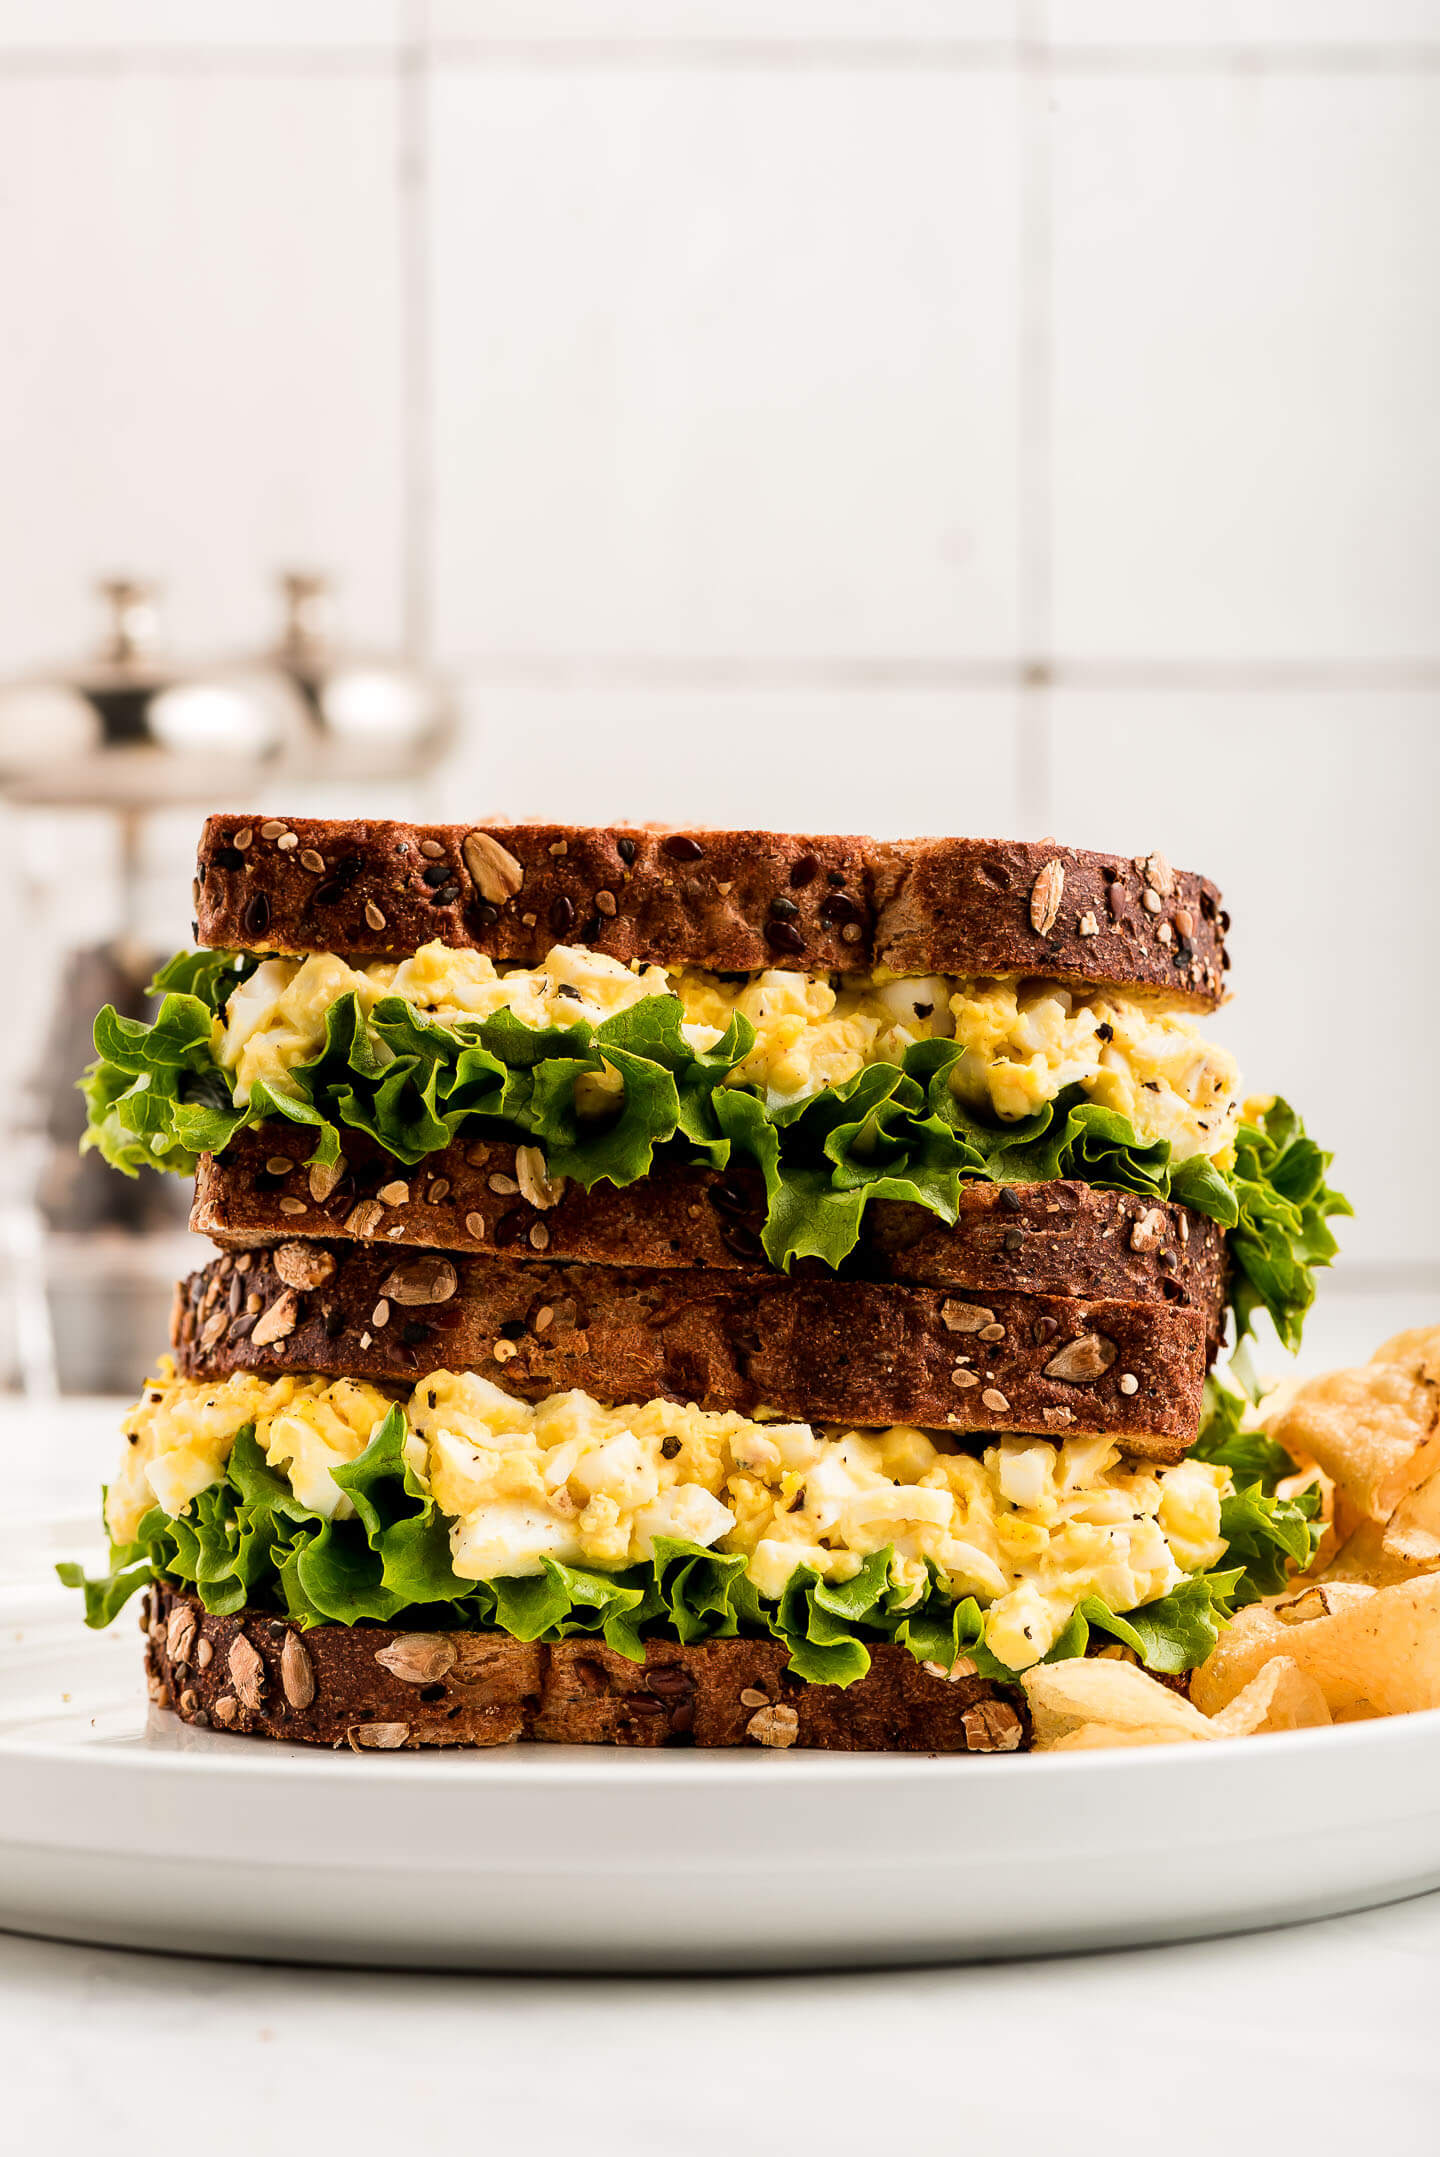 Two Egg Salad Sandwiches stacked on top of each other on a plate.